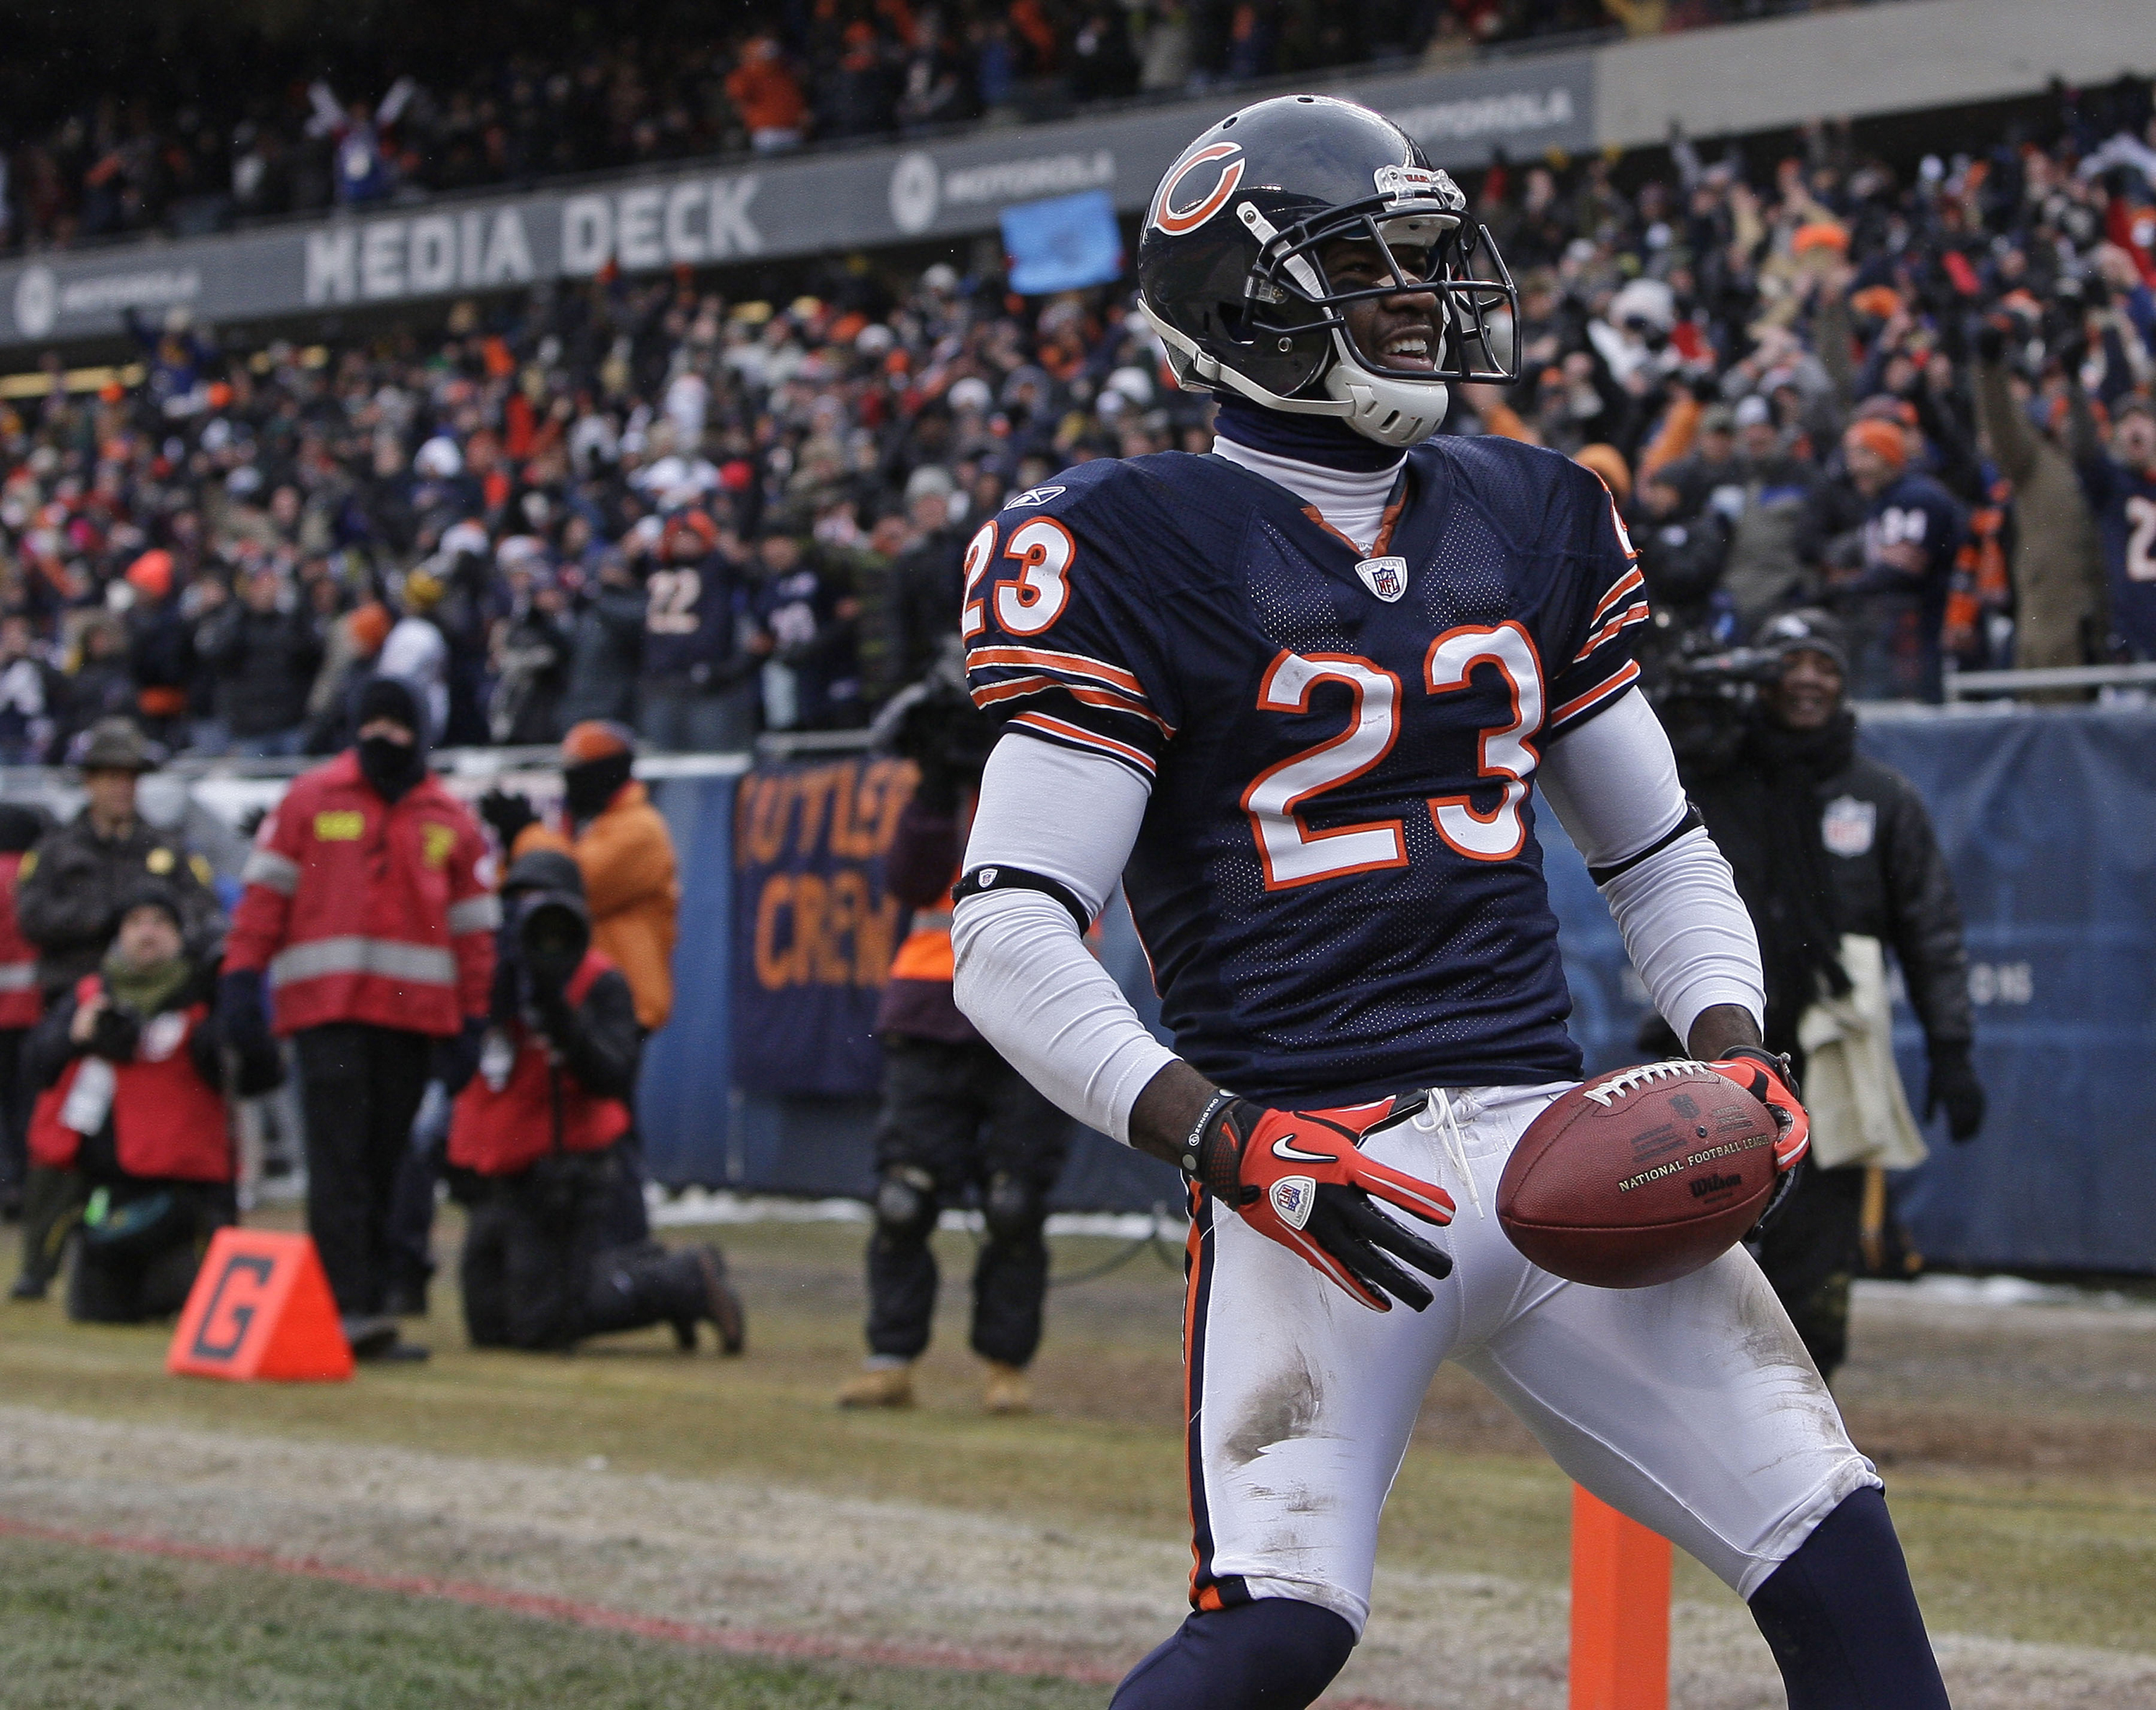 Bears wide receiver/kick returner Devin Hester is a finalist for the Pro Football Hall of Fame